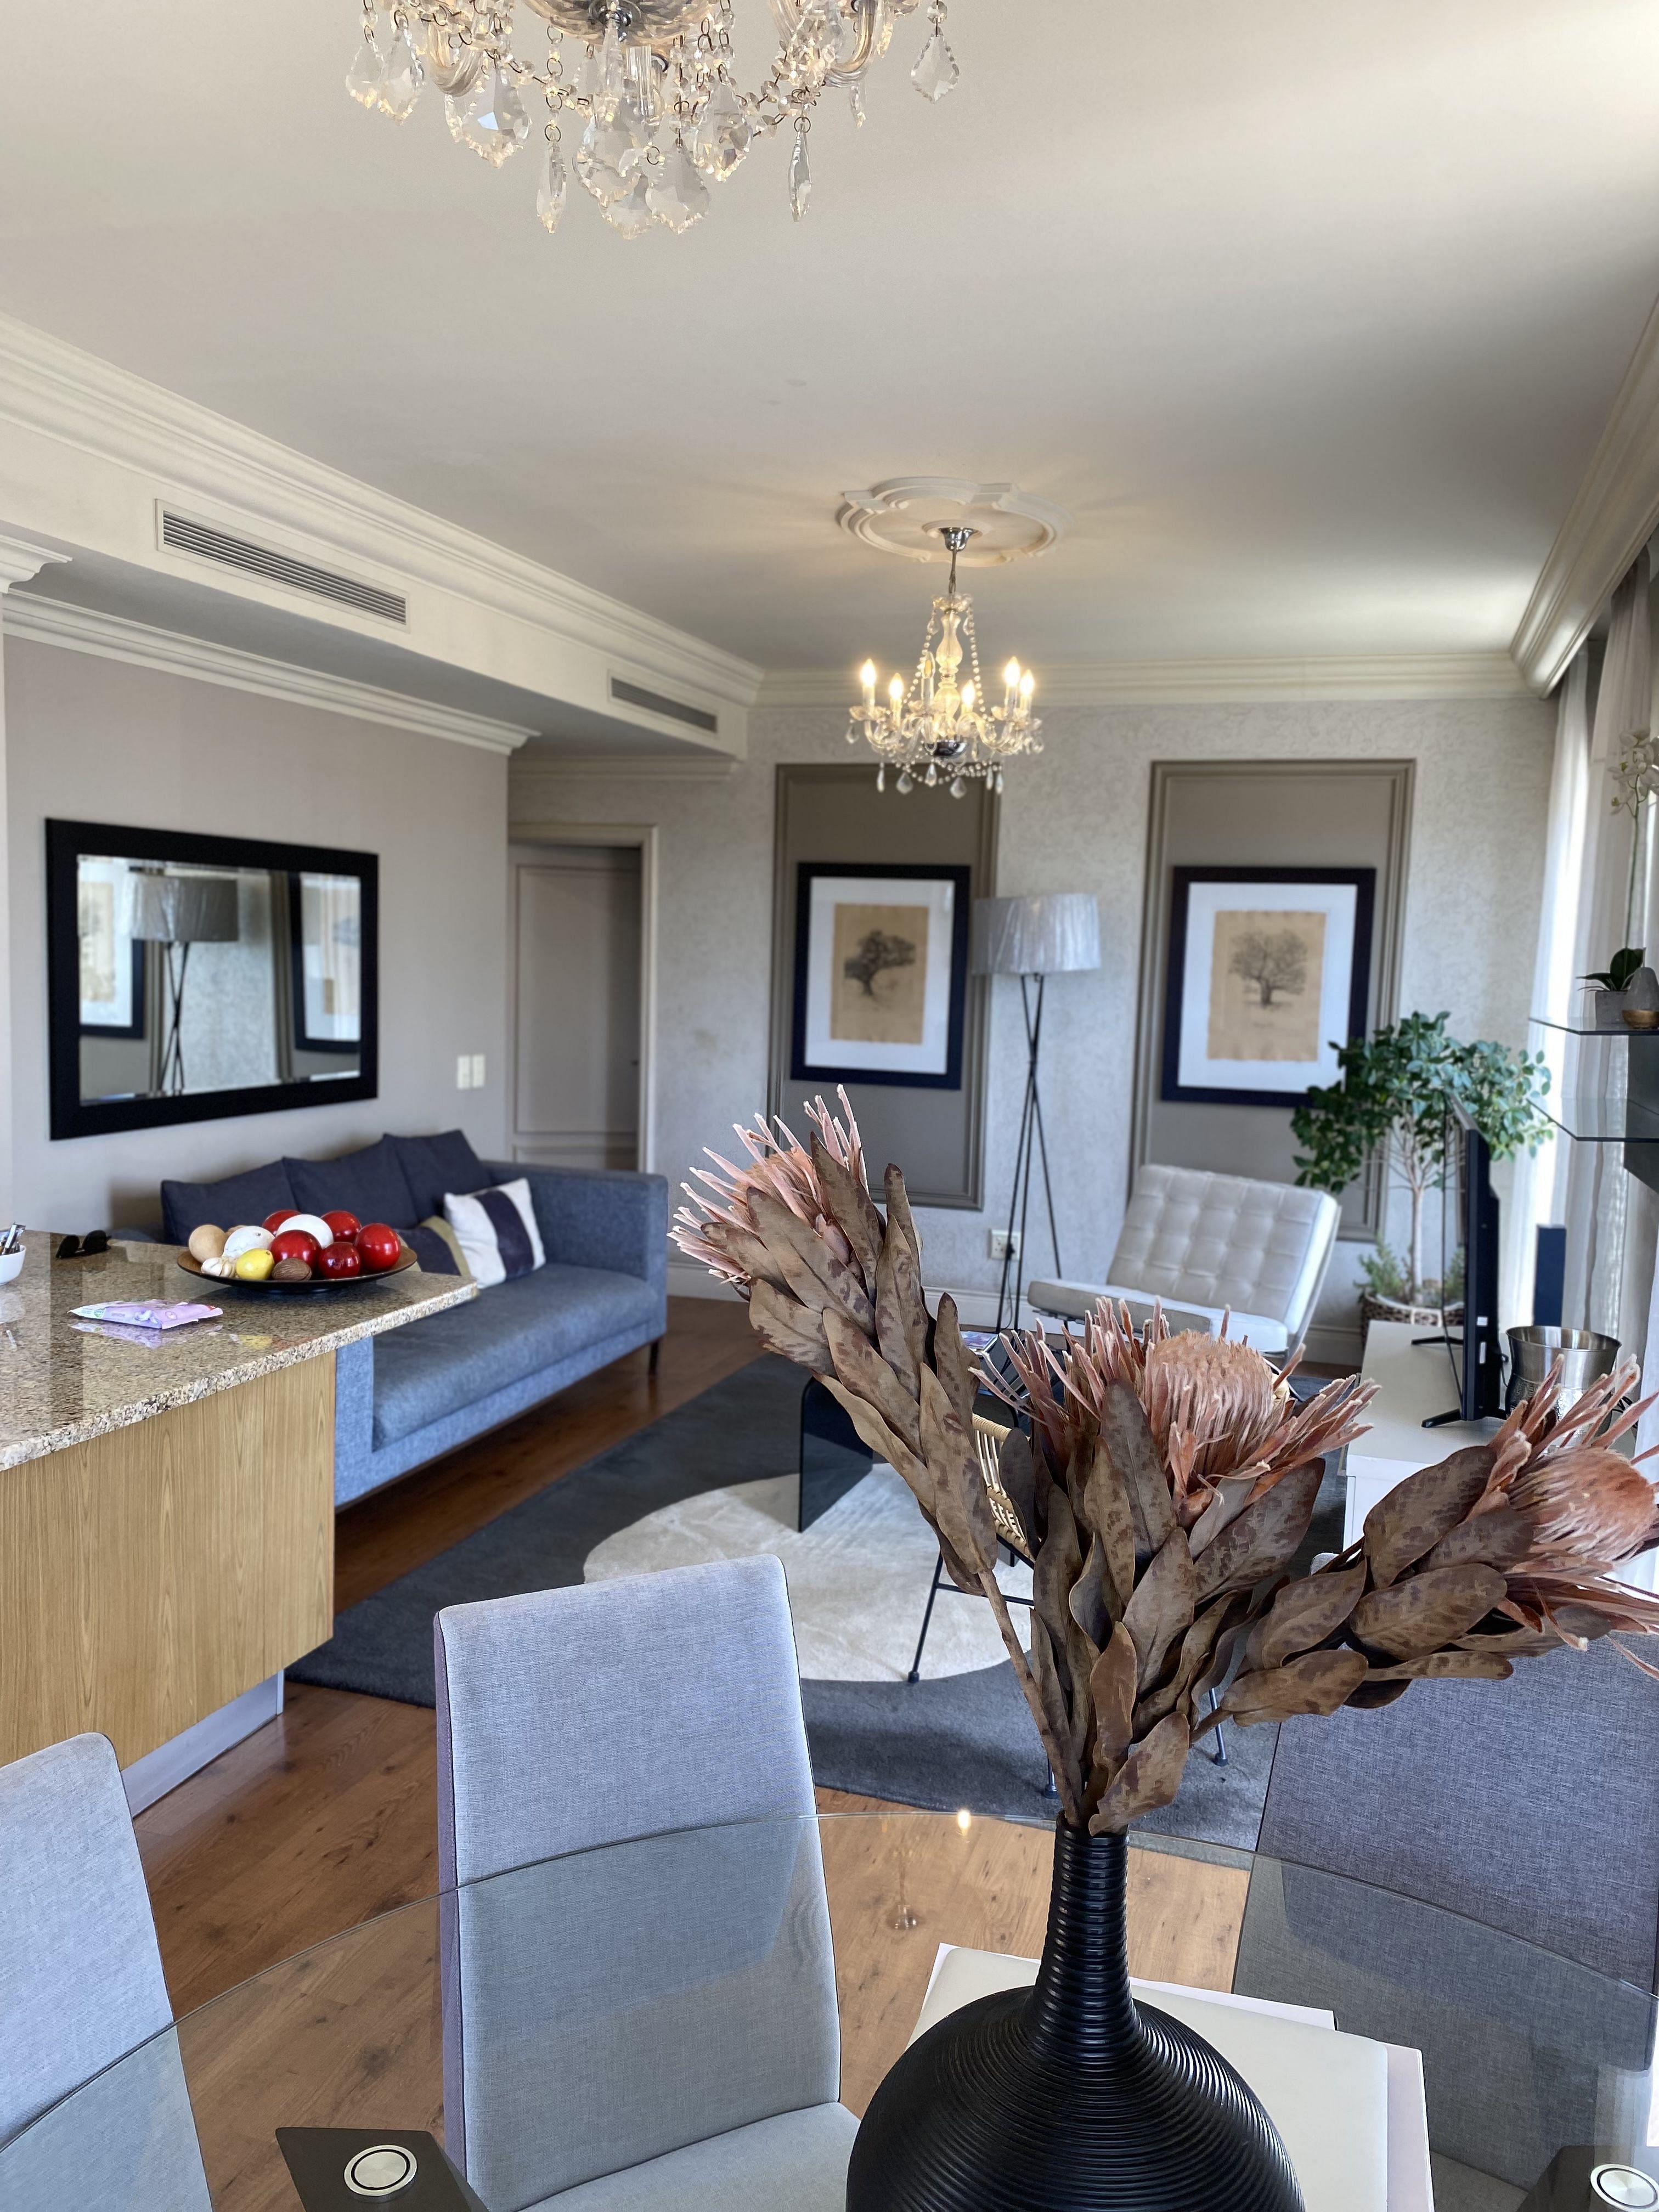 JWguest Apartment at Cape Town, Western Cape | Luxury modern apartment with view | Jwbnb no brobnb 9